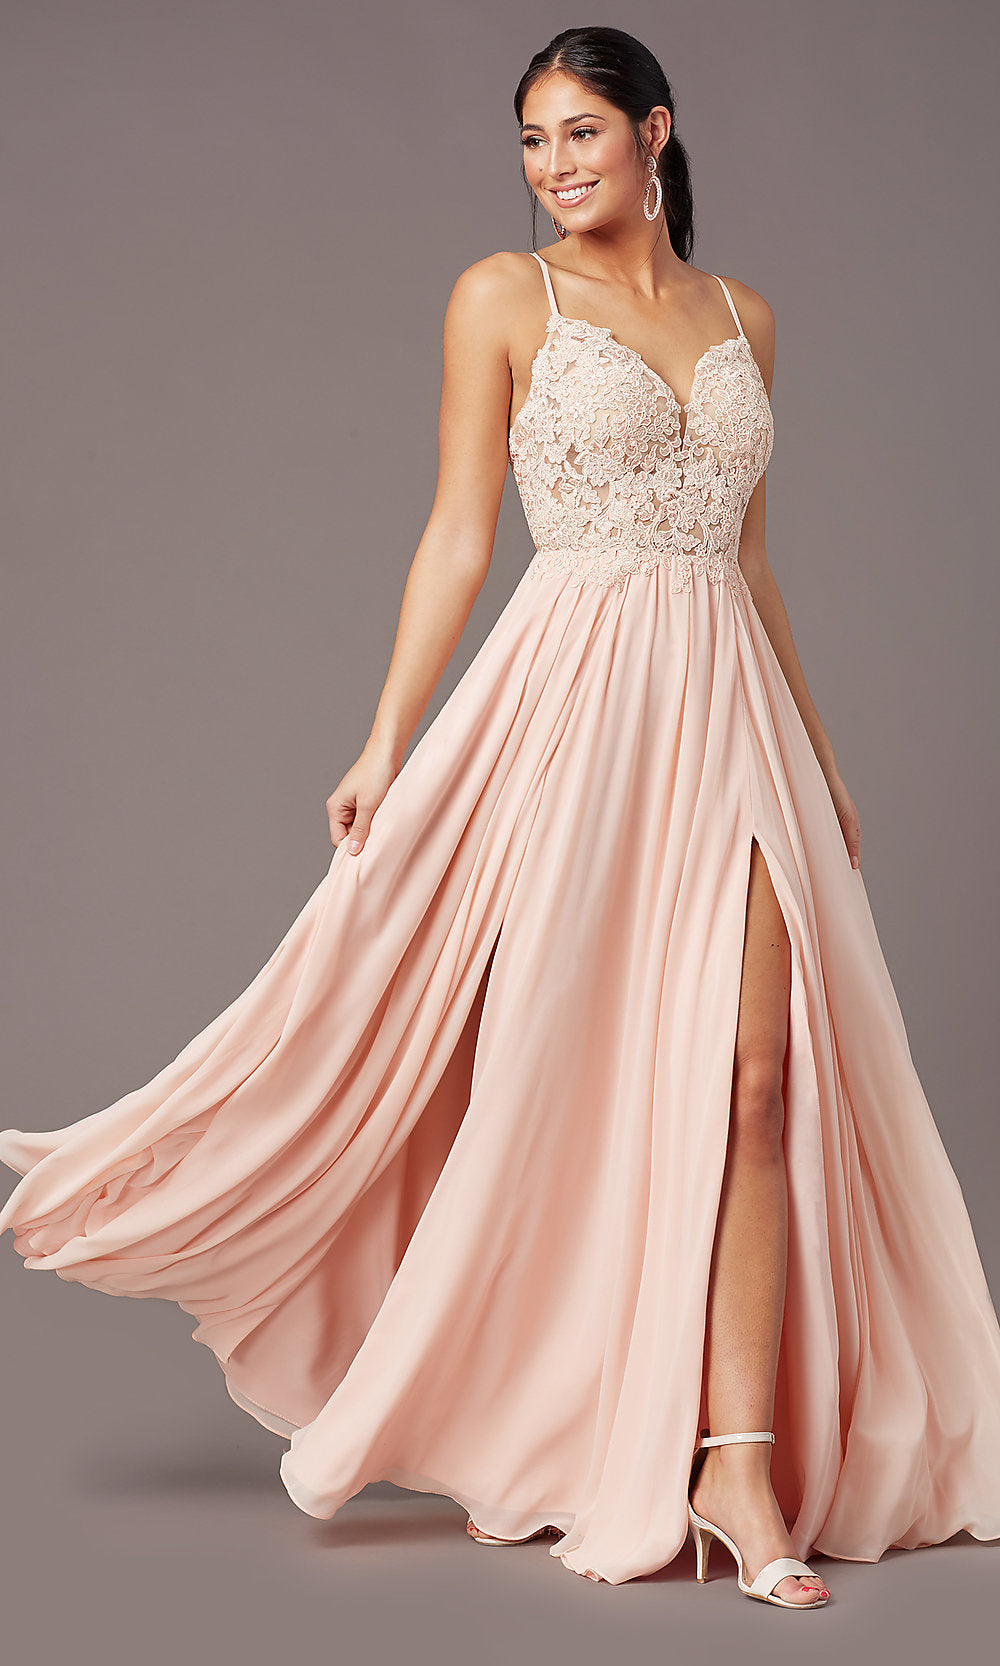 Embroidered-Bodice Long Formal Prom Dress by PromGirl